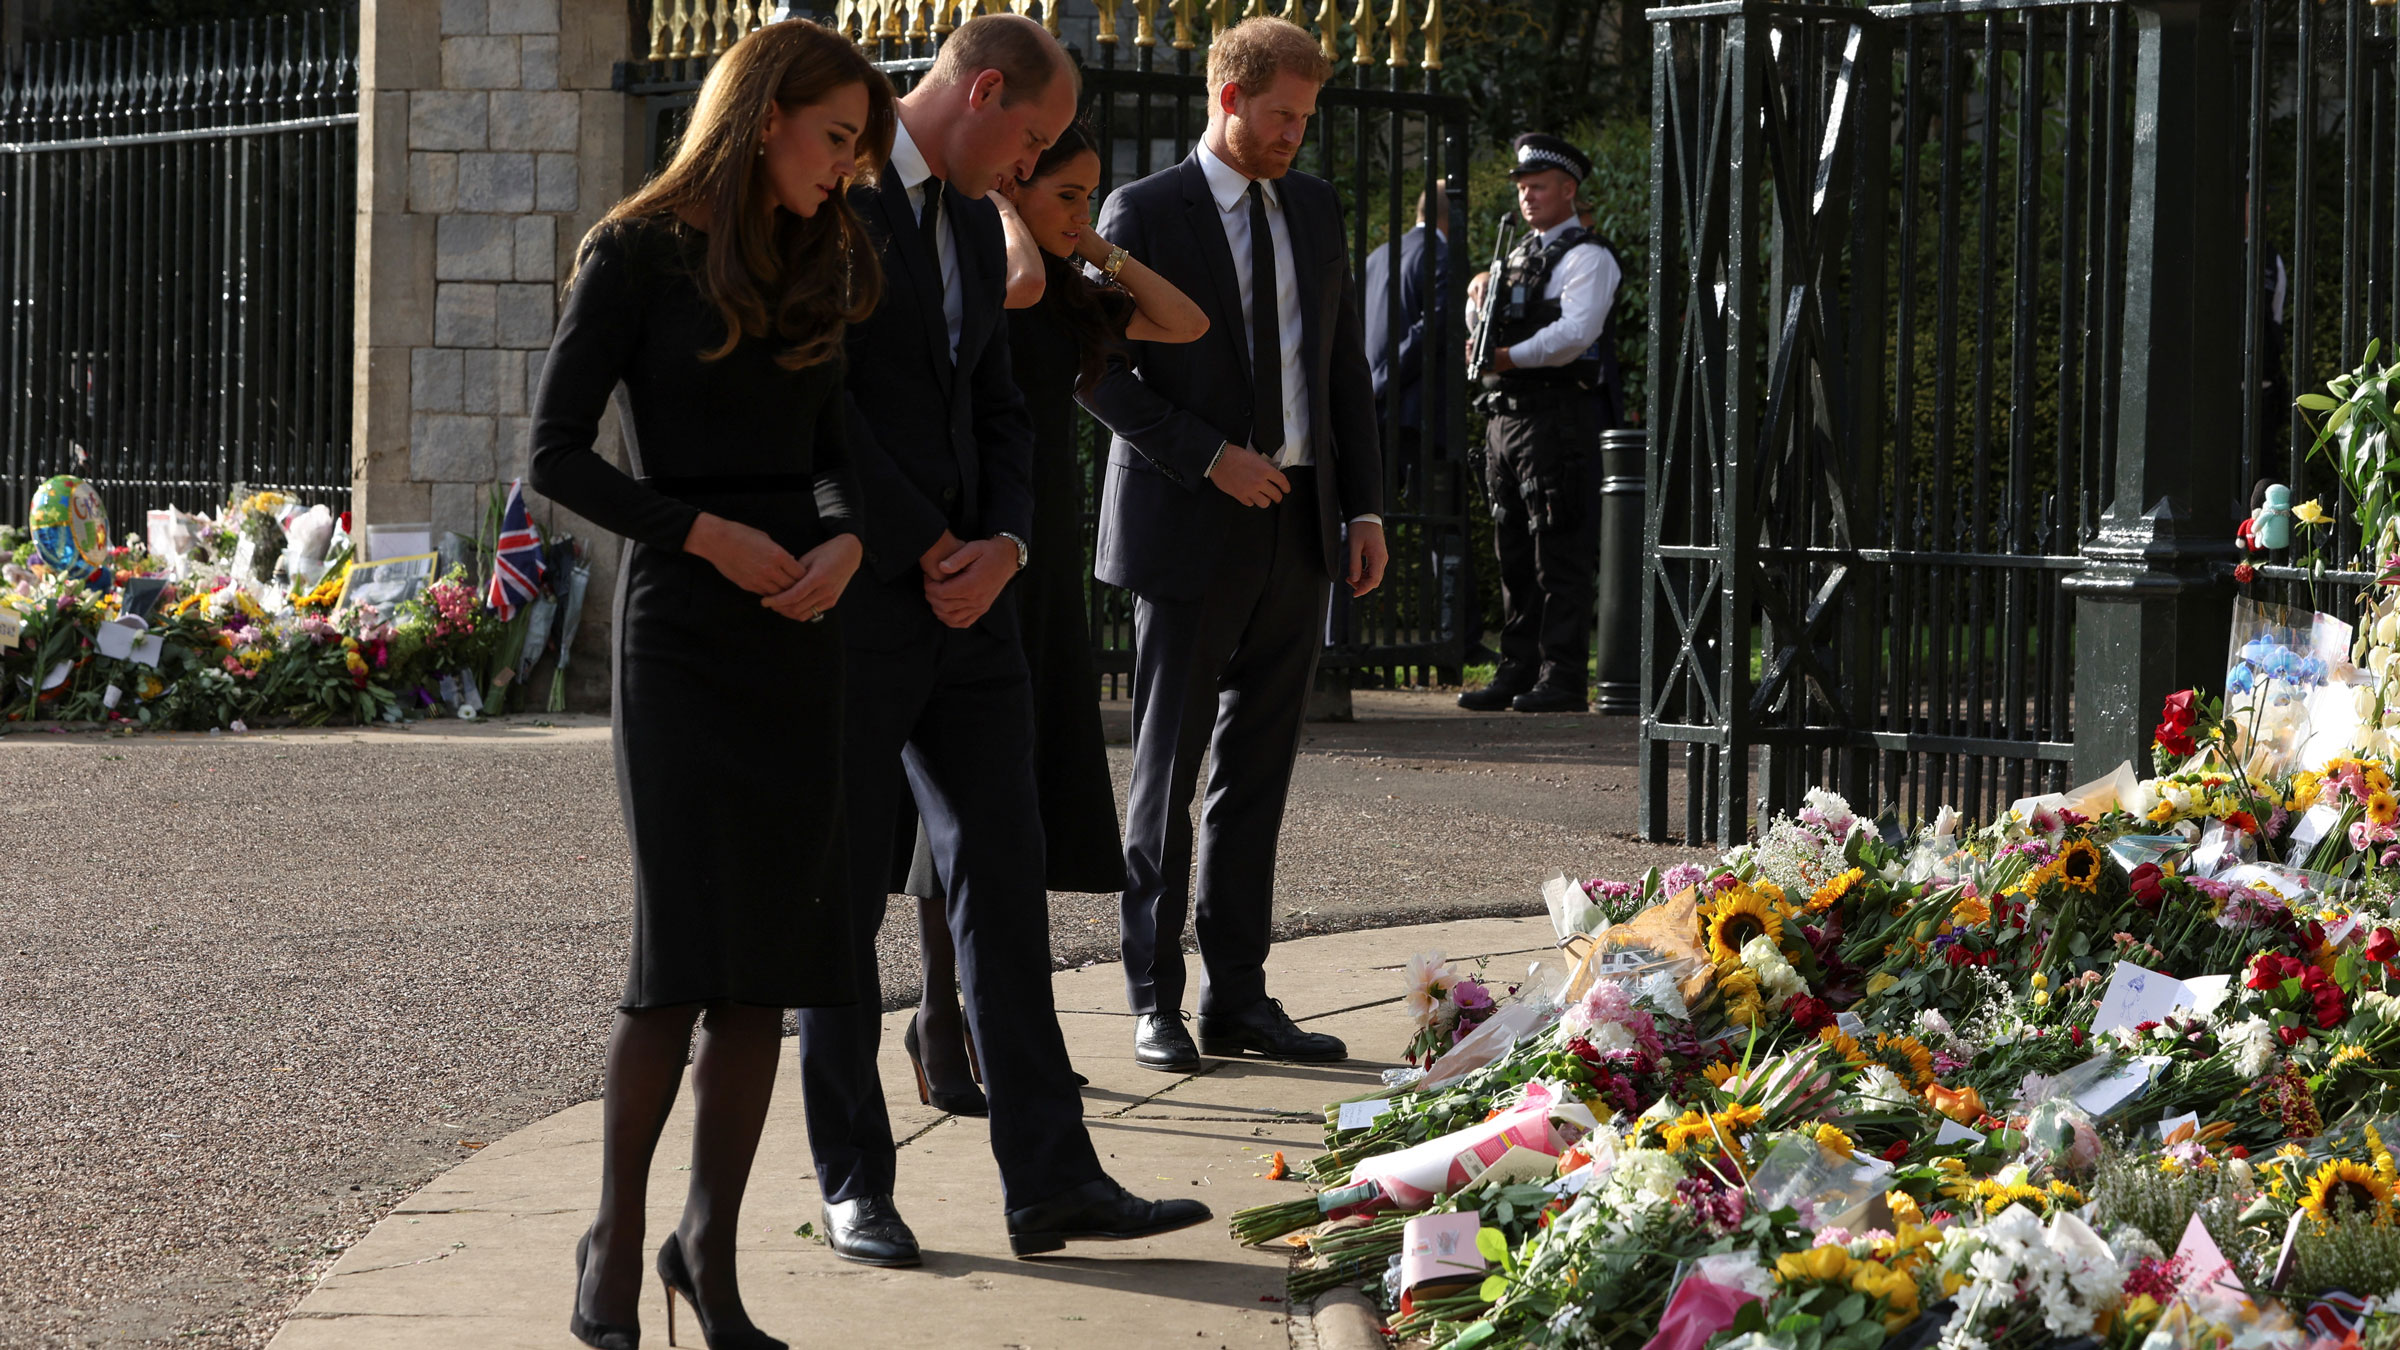 From left, Catherine, the Princess of Wales; Prince William; Meghan, the Duchess of Sussex; and Prince Harry look at floral tributes as they walk outside Windsor Castle on Saturday.